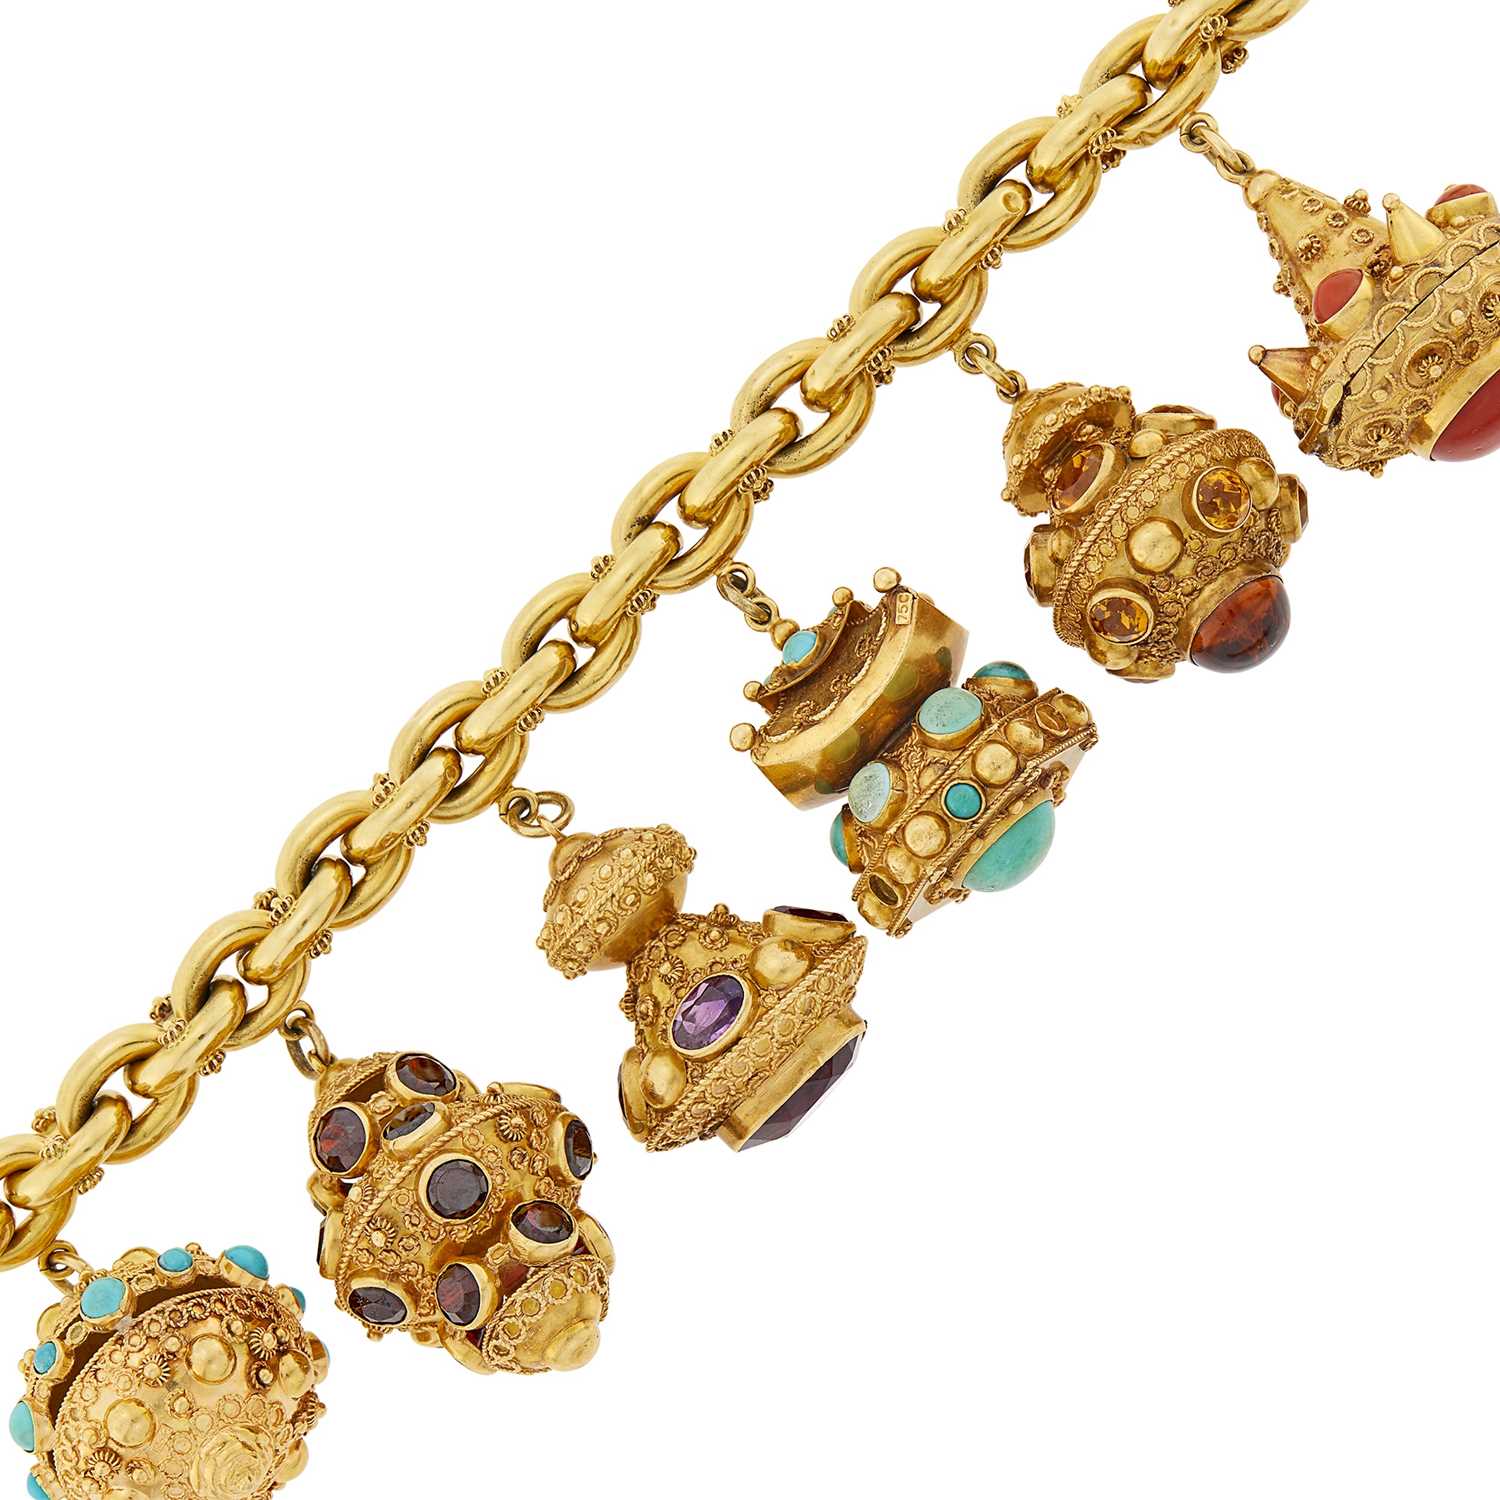 Lot 1013 - Gold, Hardstone and Colored Stone Charm Bracelet